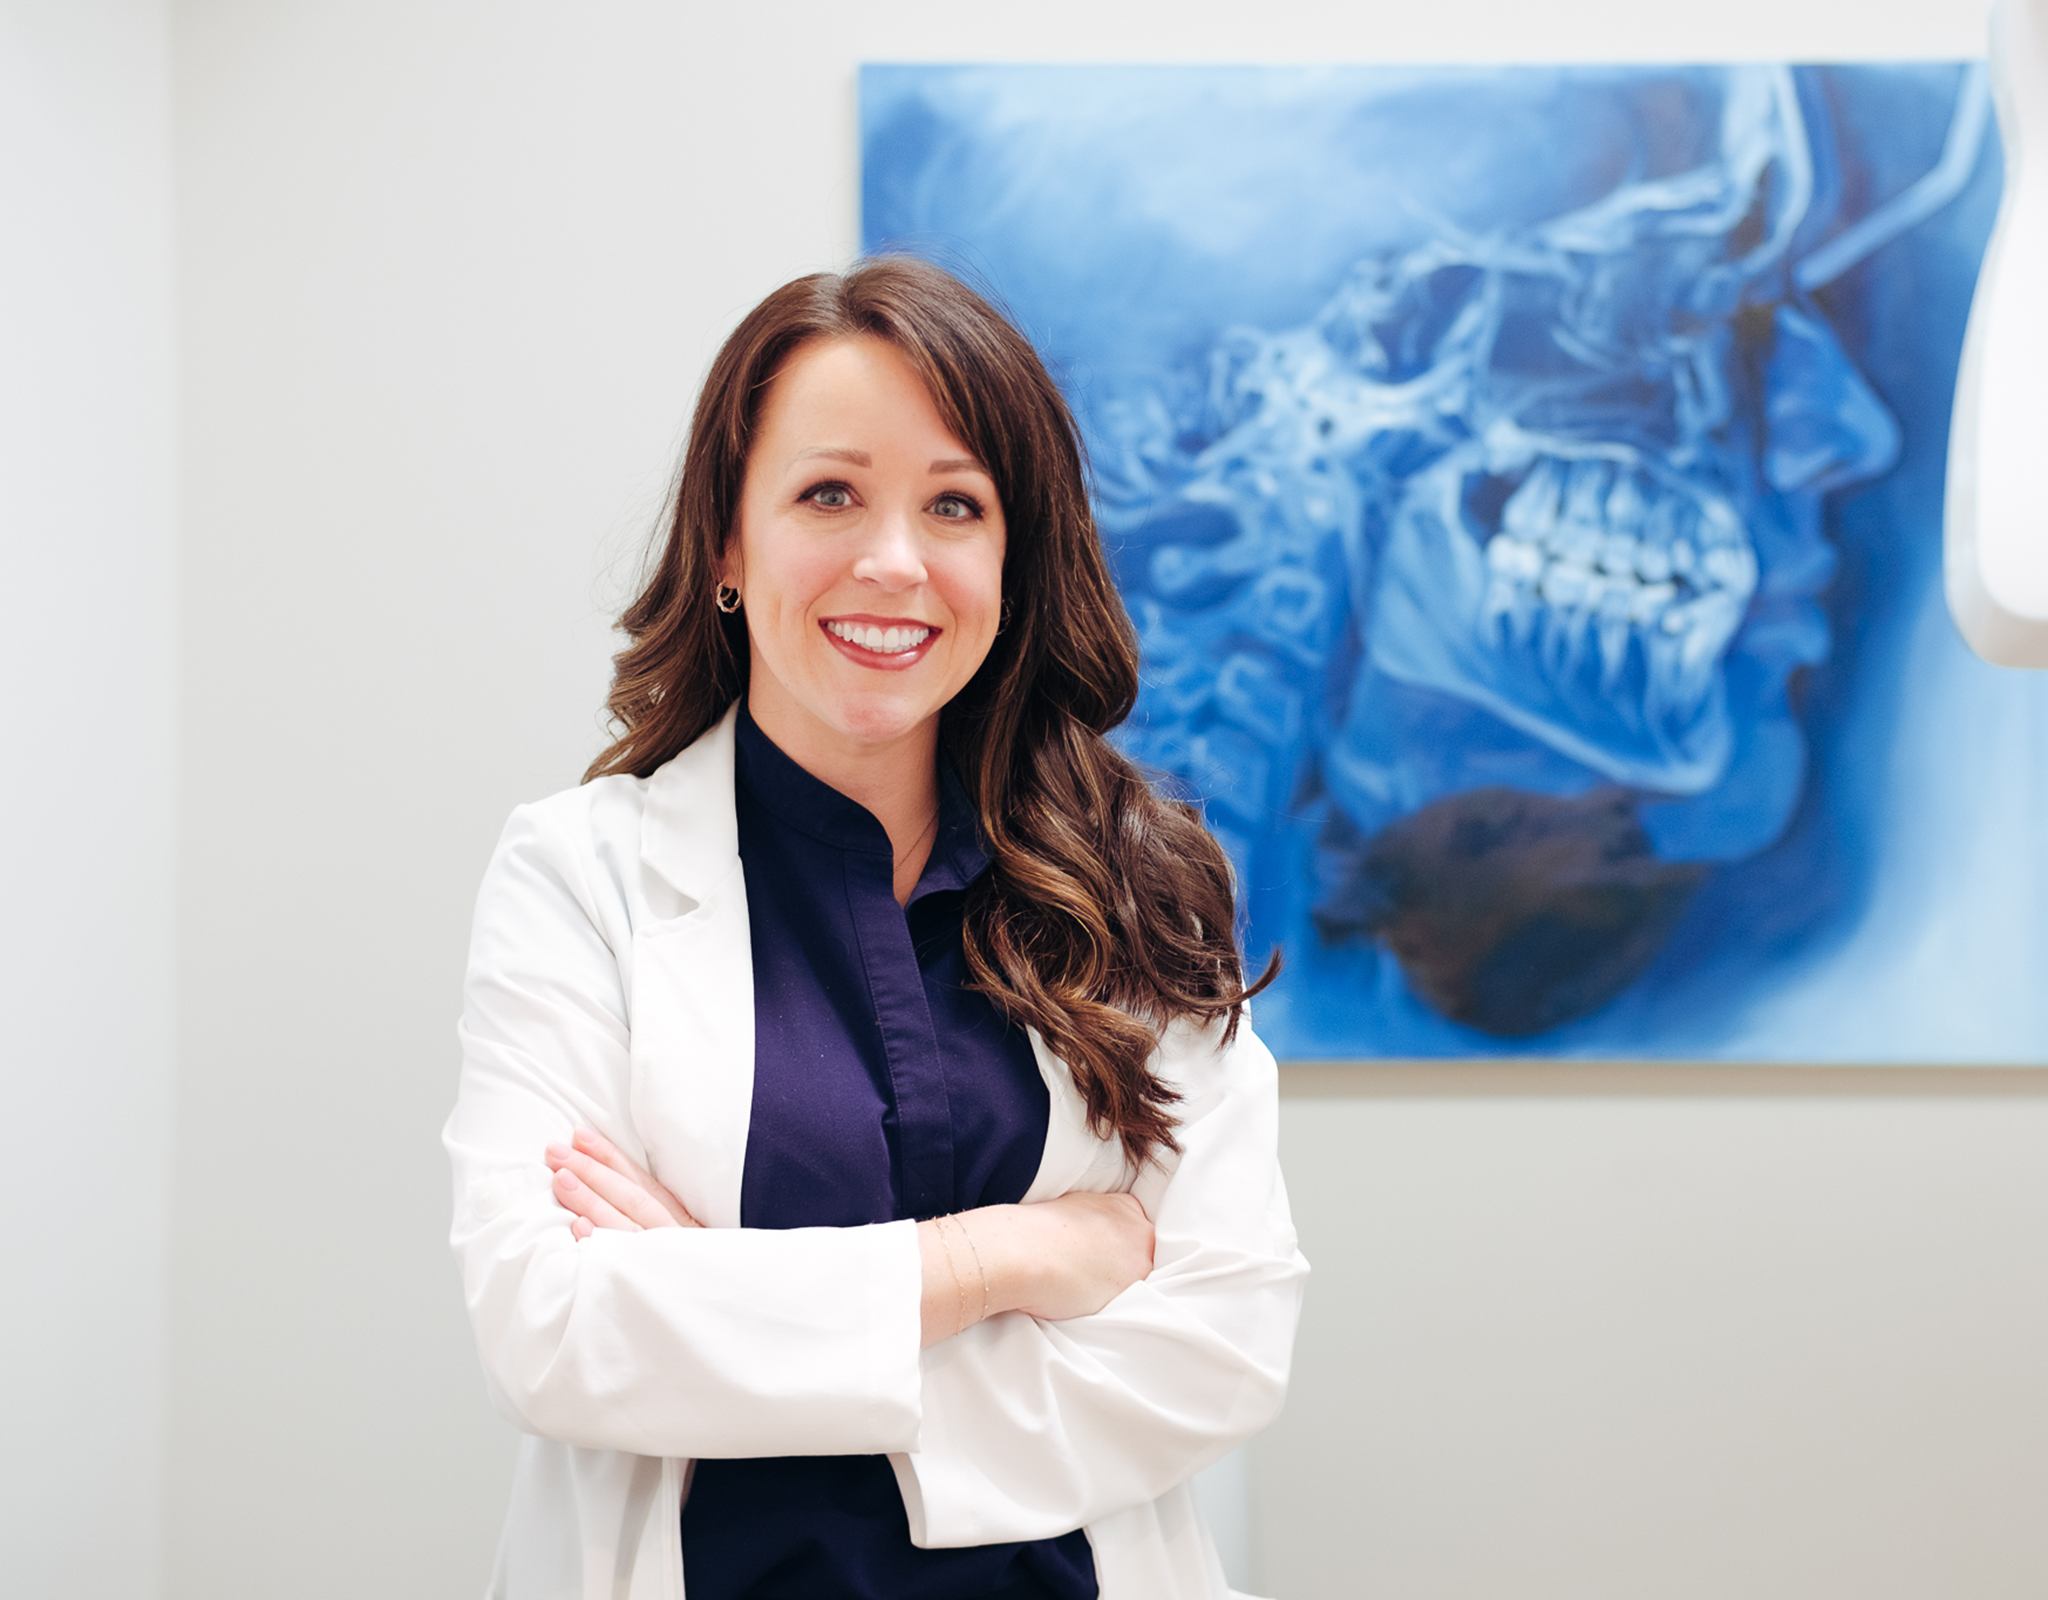 A woman, Dr. Christina Pruitt, stands smiling at the camera. An large x-ray of human jaw/teeth hangs on the wall behind her.